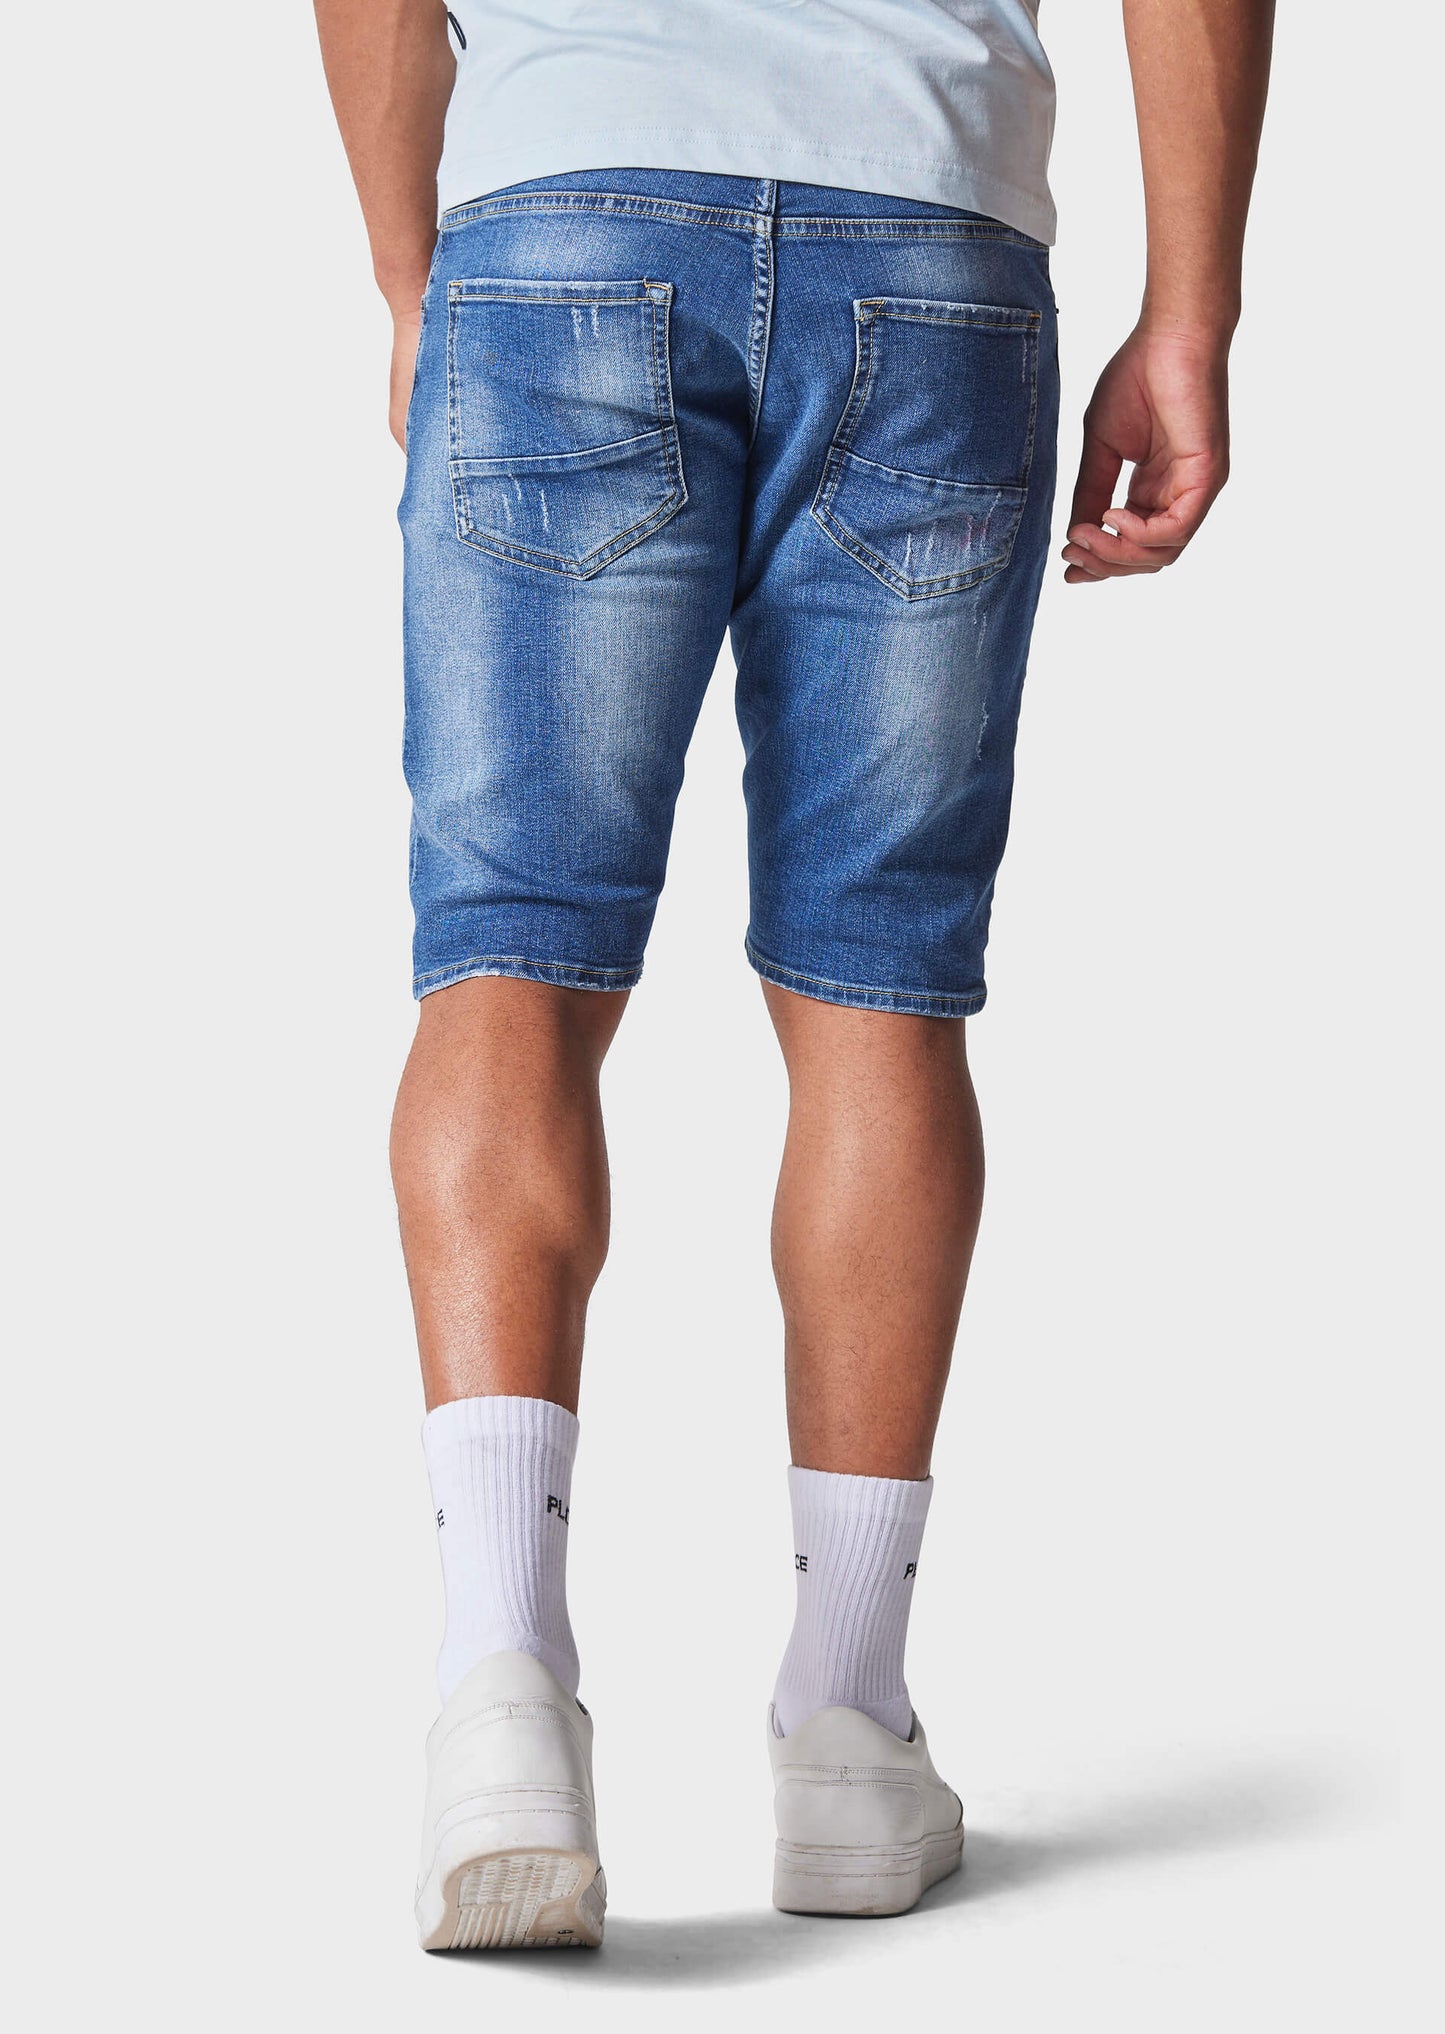 Witsel 970 Shorts